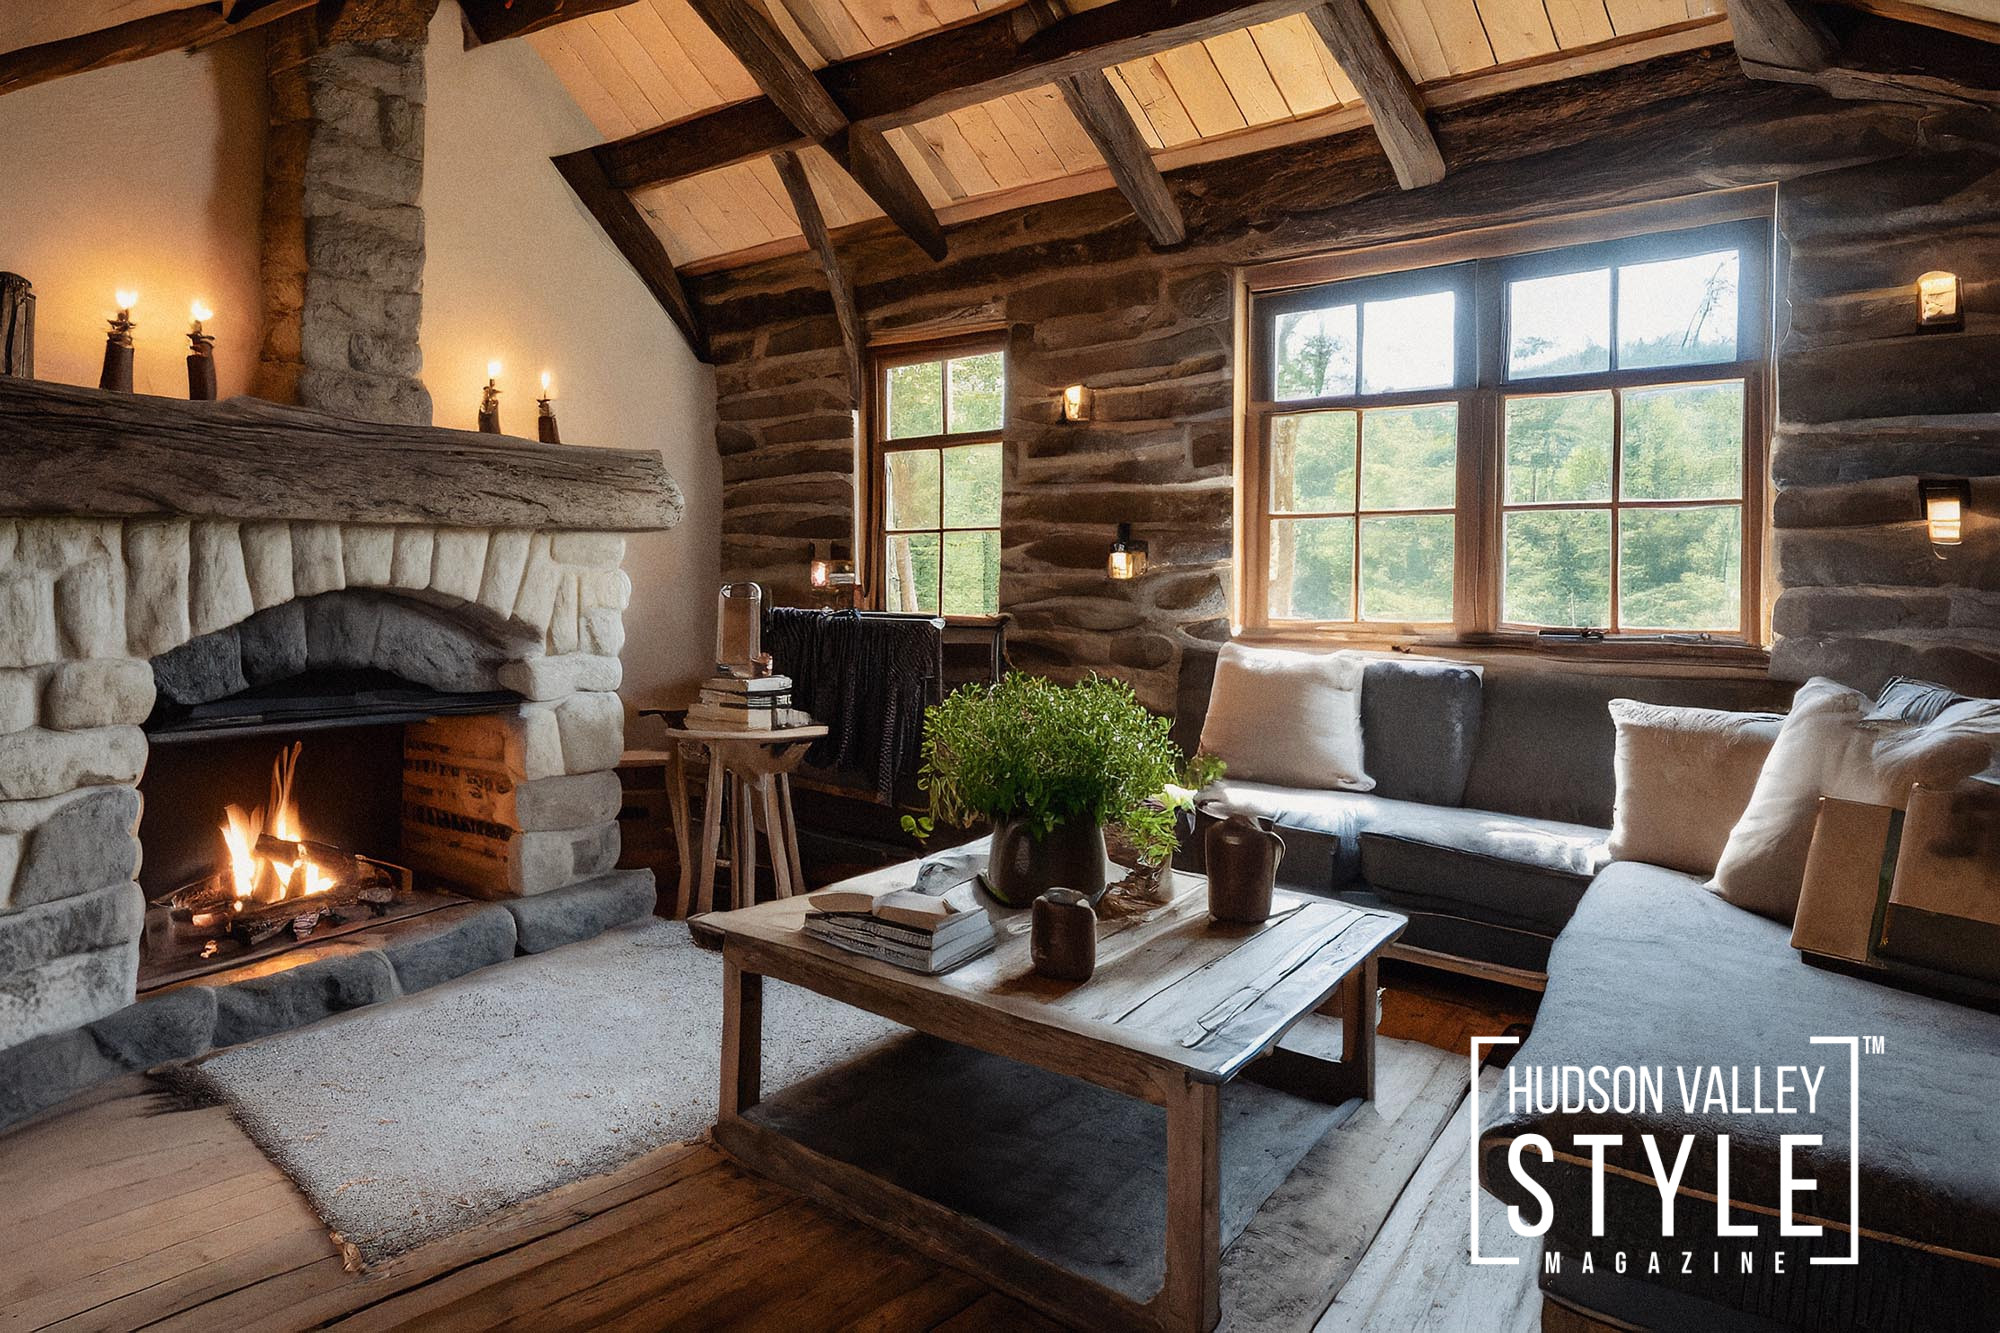 Incorporating Locally-Inspired Interior Design Themes: Decorating Your Hudson Valley & Catskills Airbnb with Authenticity – Experiential Hospitality Design 101 with Maxwell Alexander, MA(FIT), BFA(SVA)